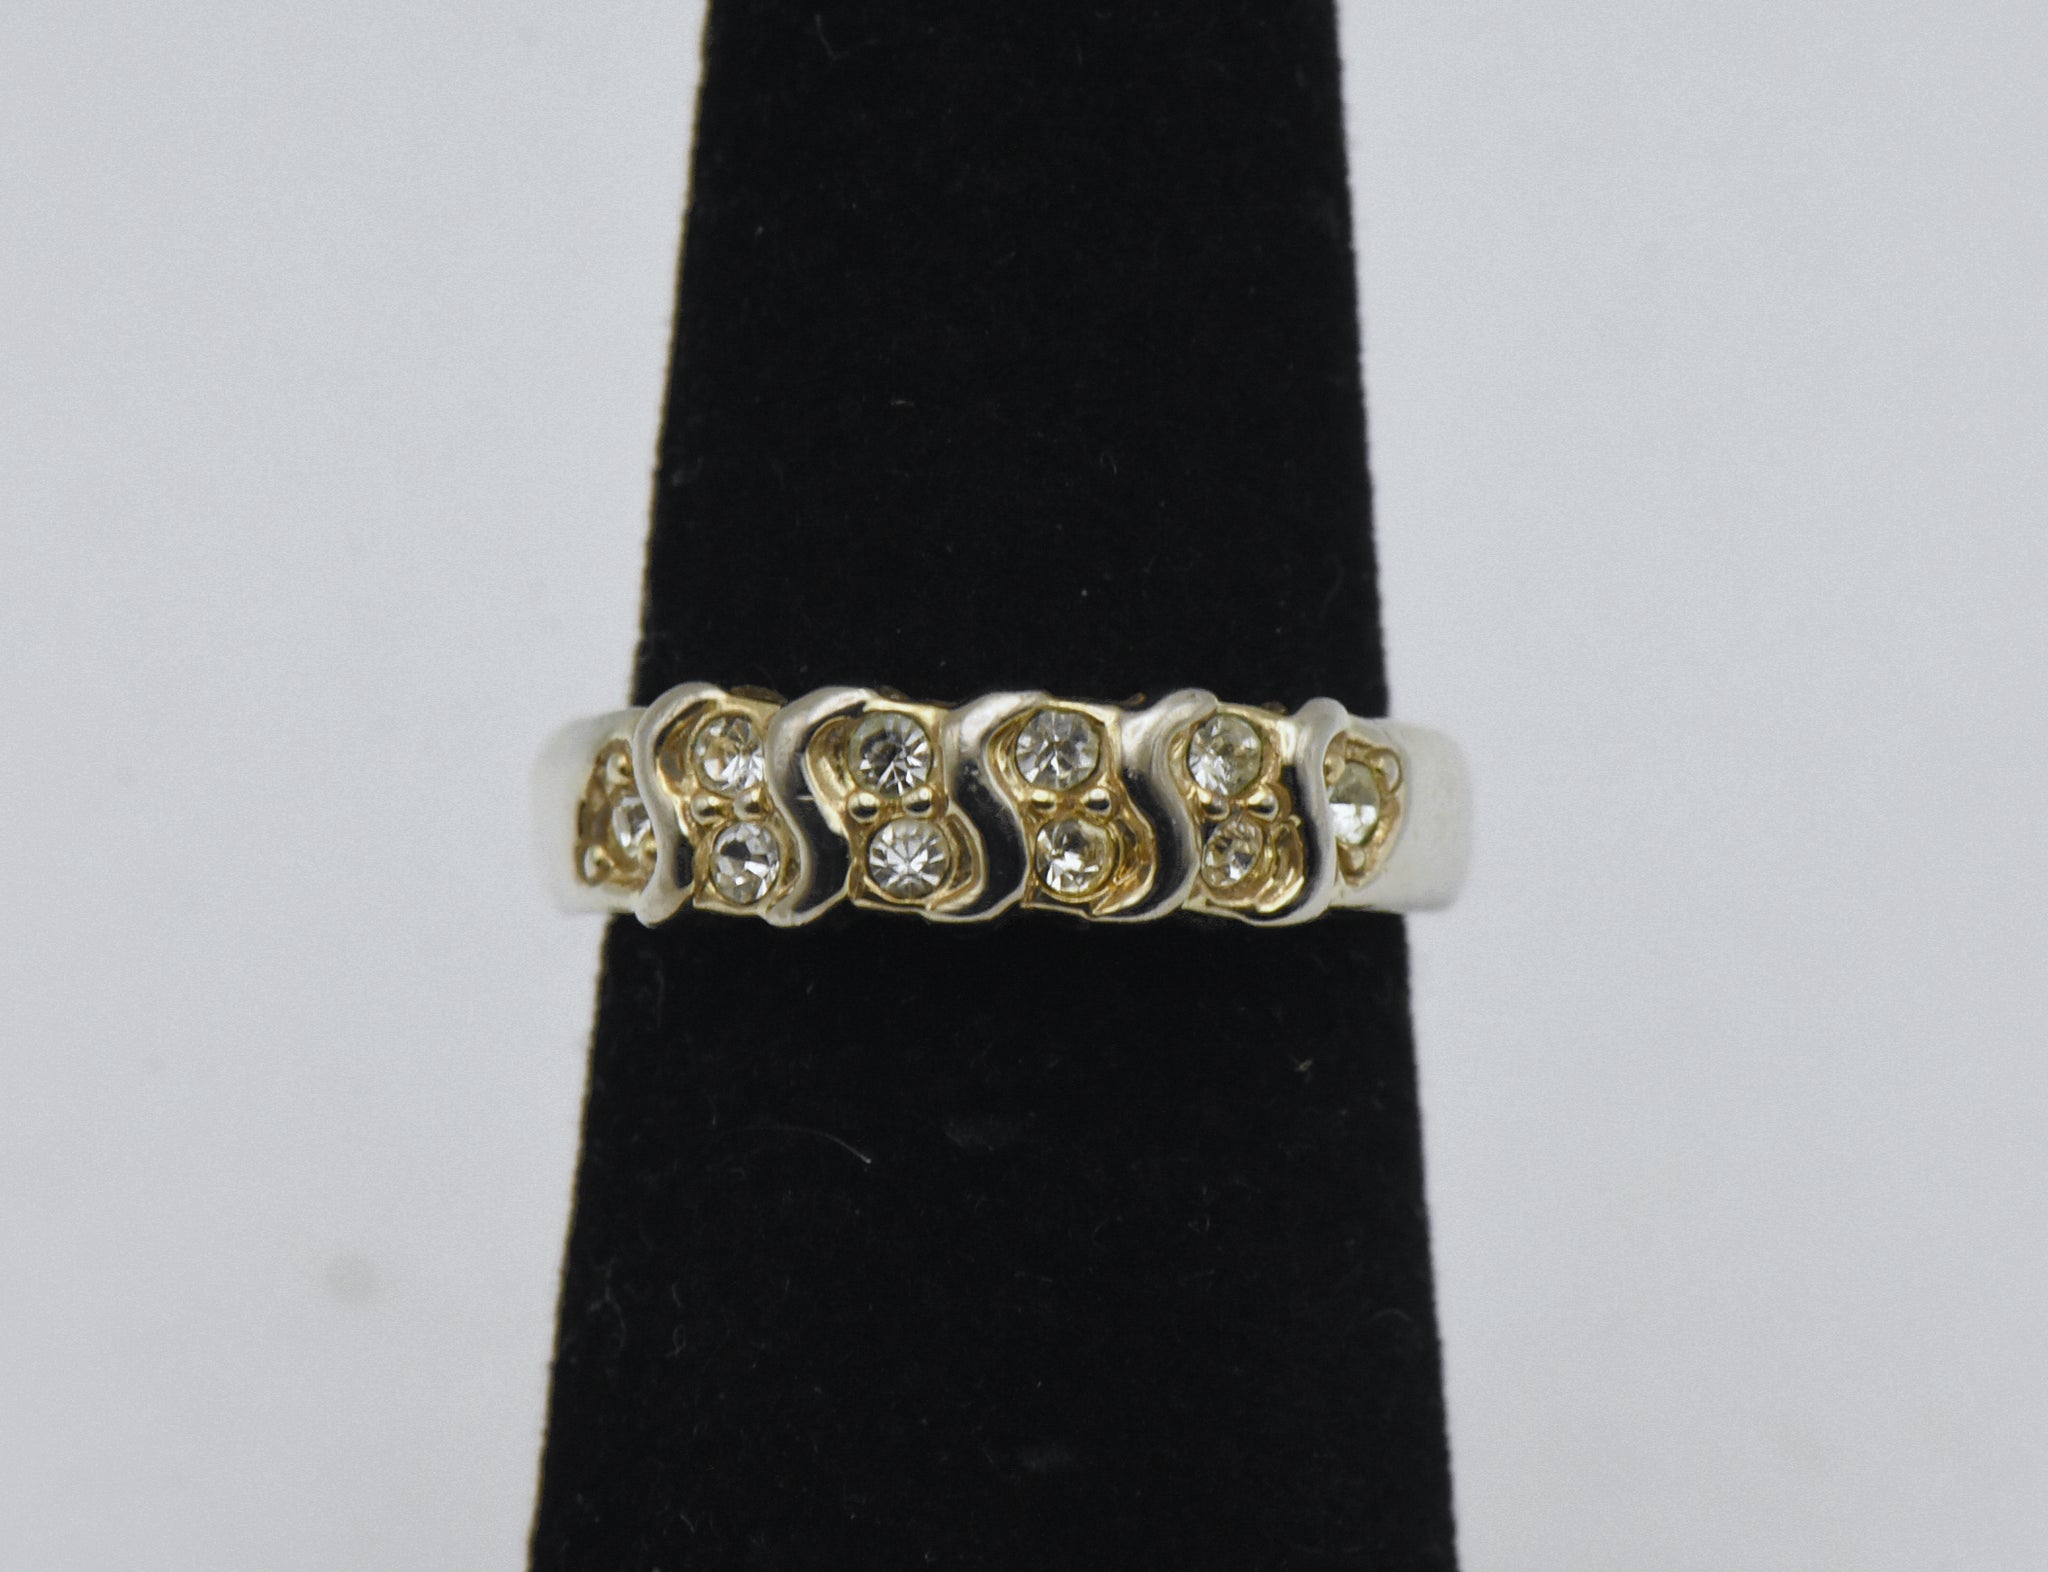 Vintage Gold Tone and Rhinestones Ring - Size 5.5